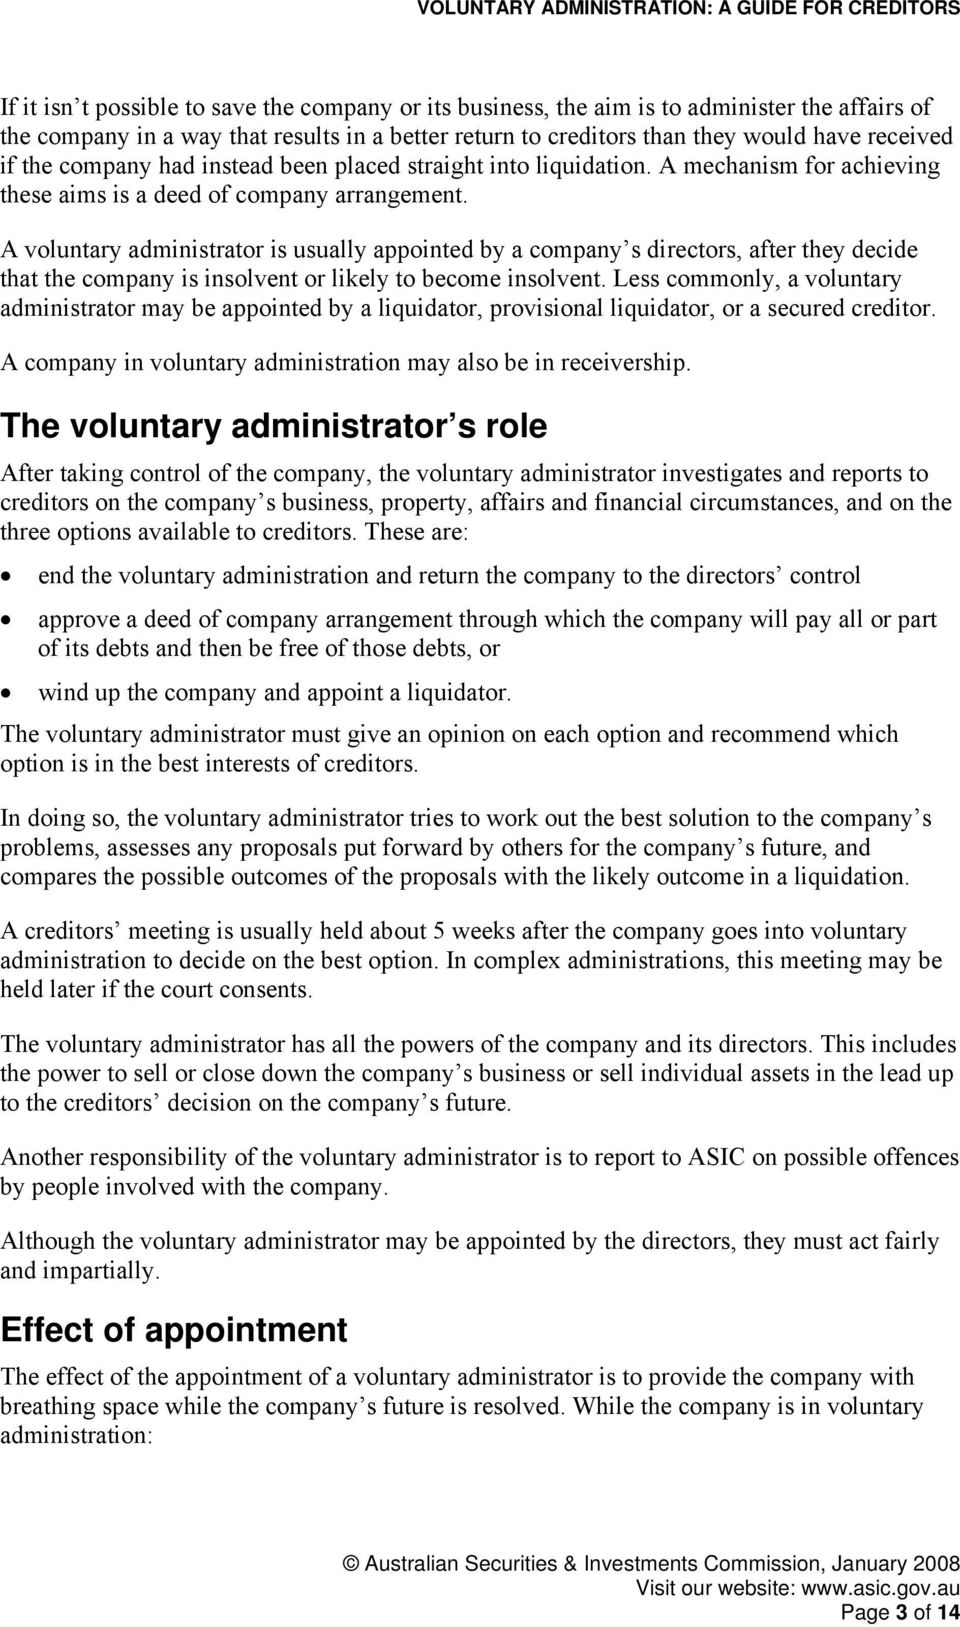 A voluntary administrator is usually appointed by a company s directors, after they decide that the company is insolvent or likely to become insolvent.